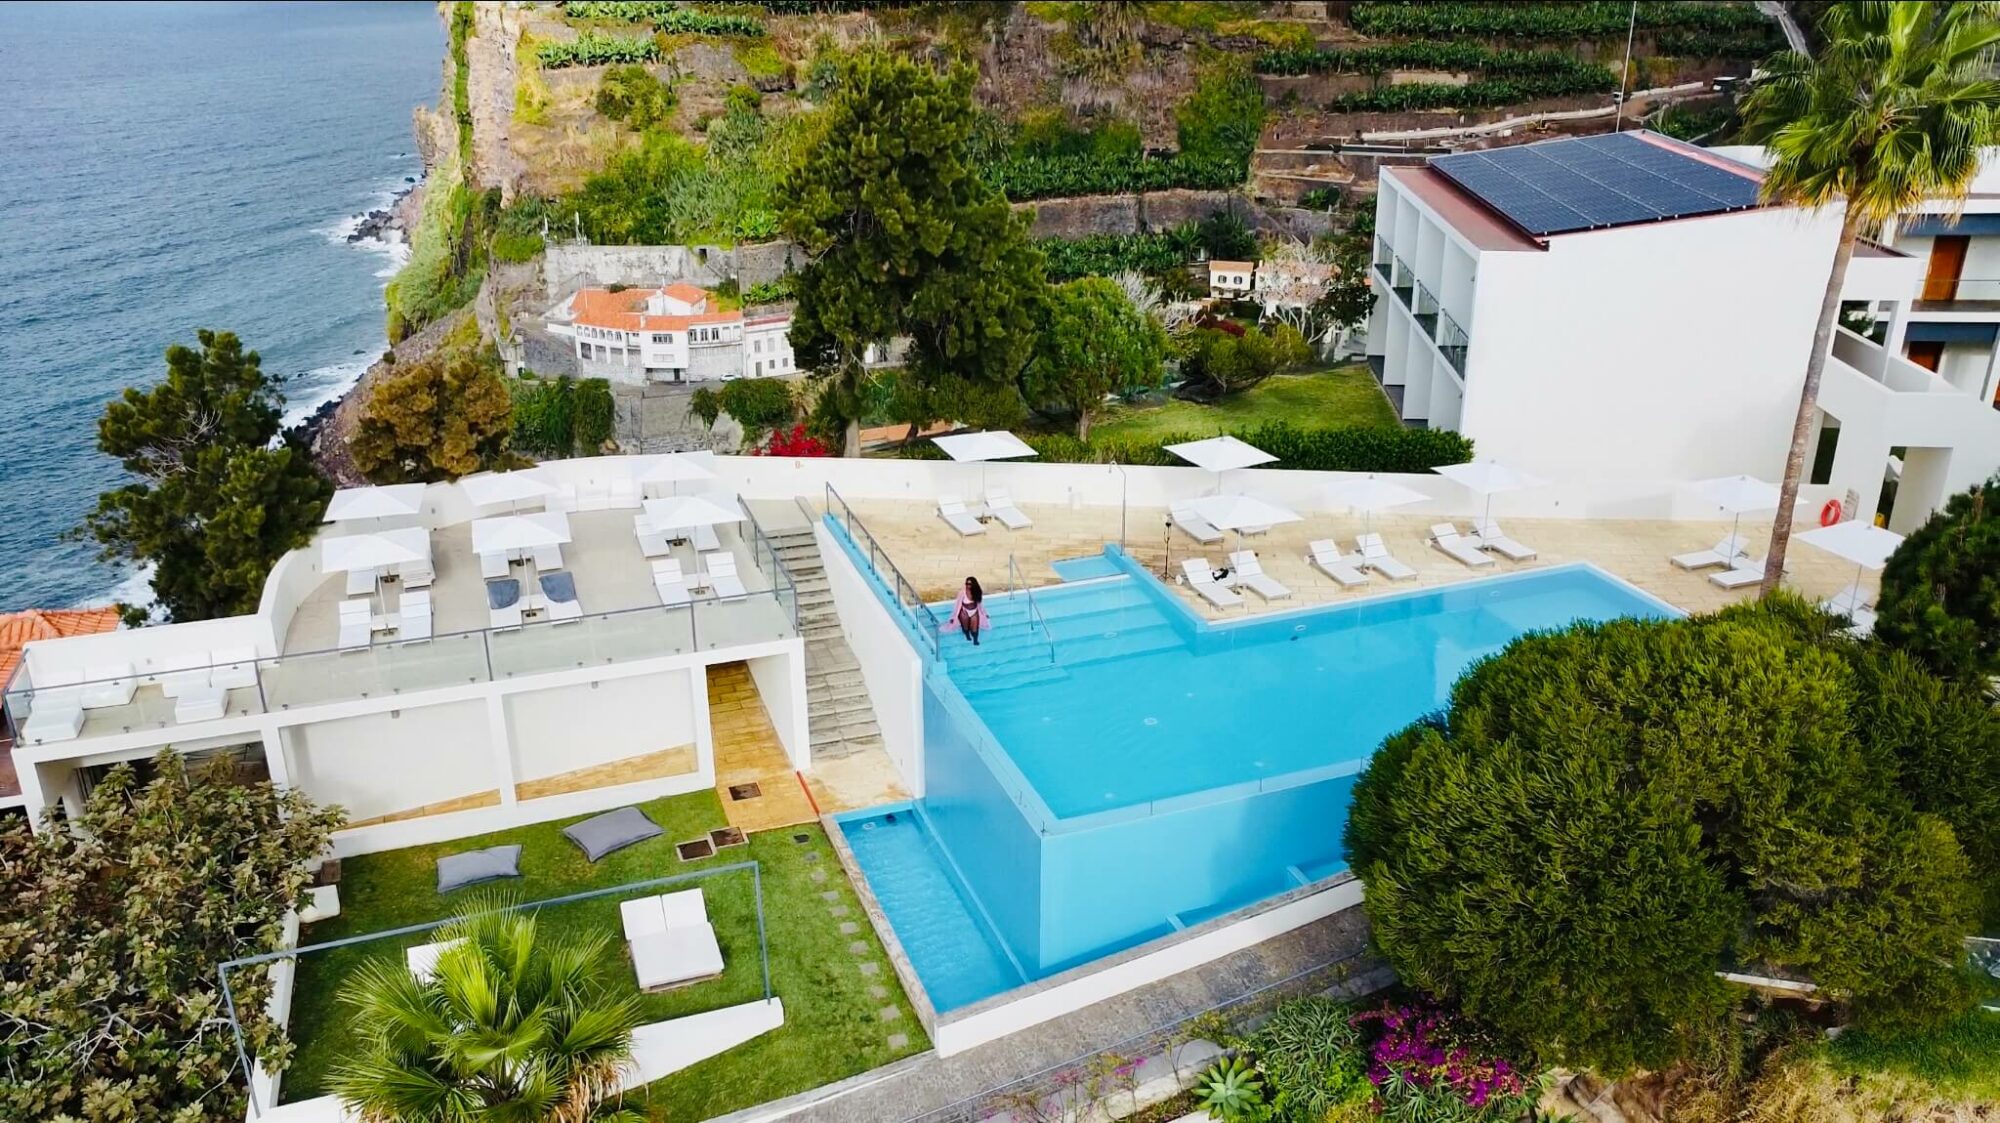 6 best places to stay in madeira as a tourist